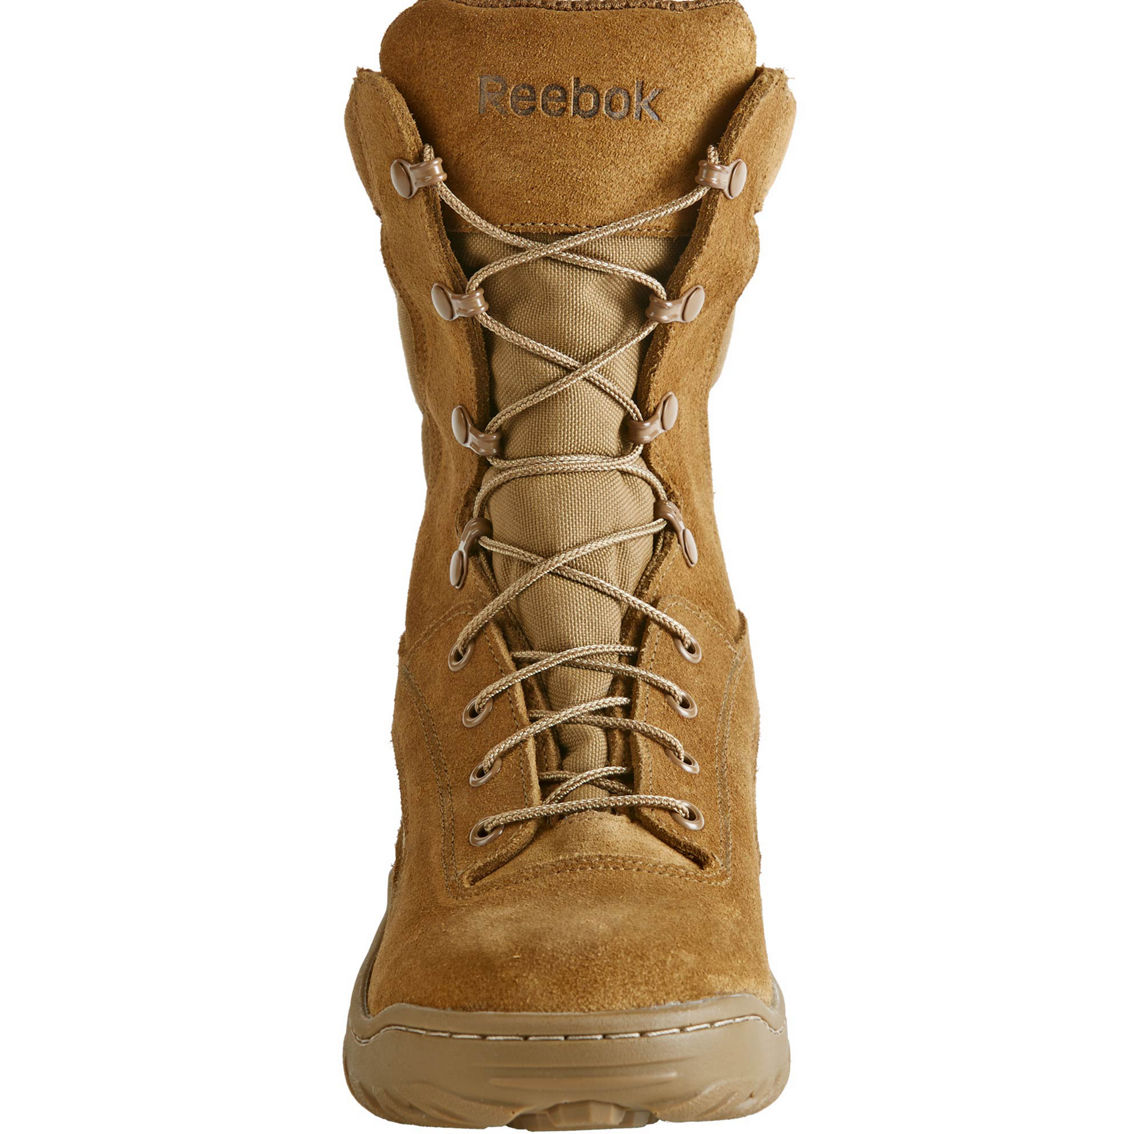 Reebok Fusion Max 8 in. Military Hot Weather Boots - Image 4 of 5